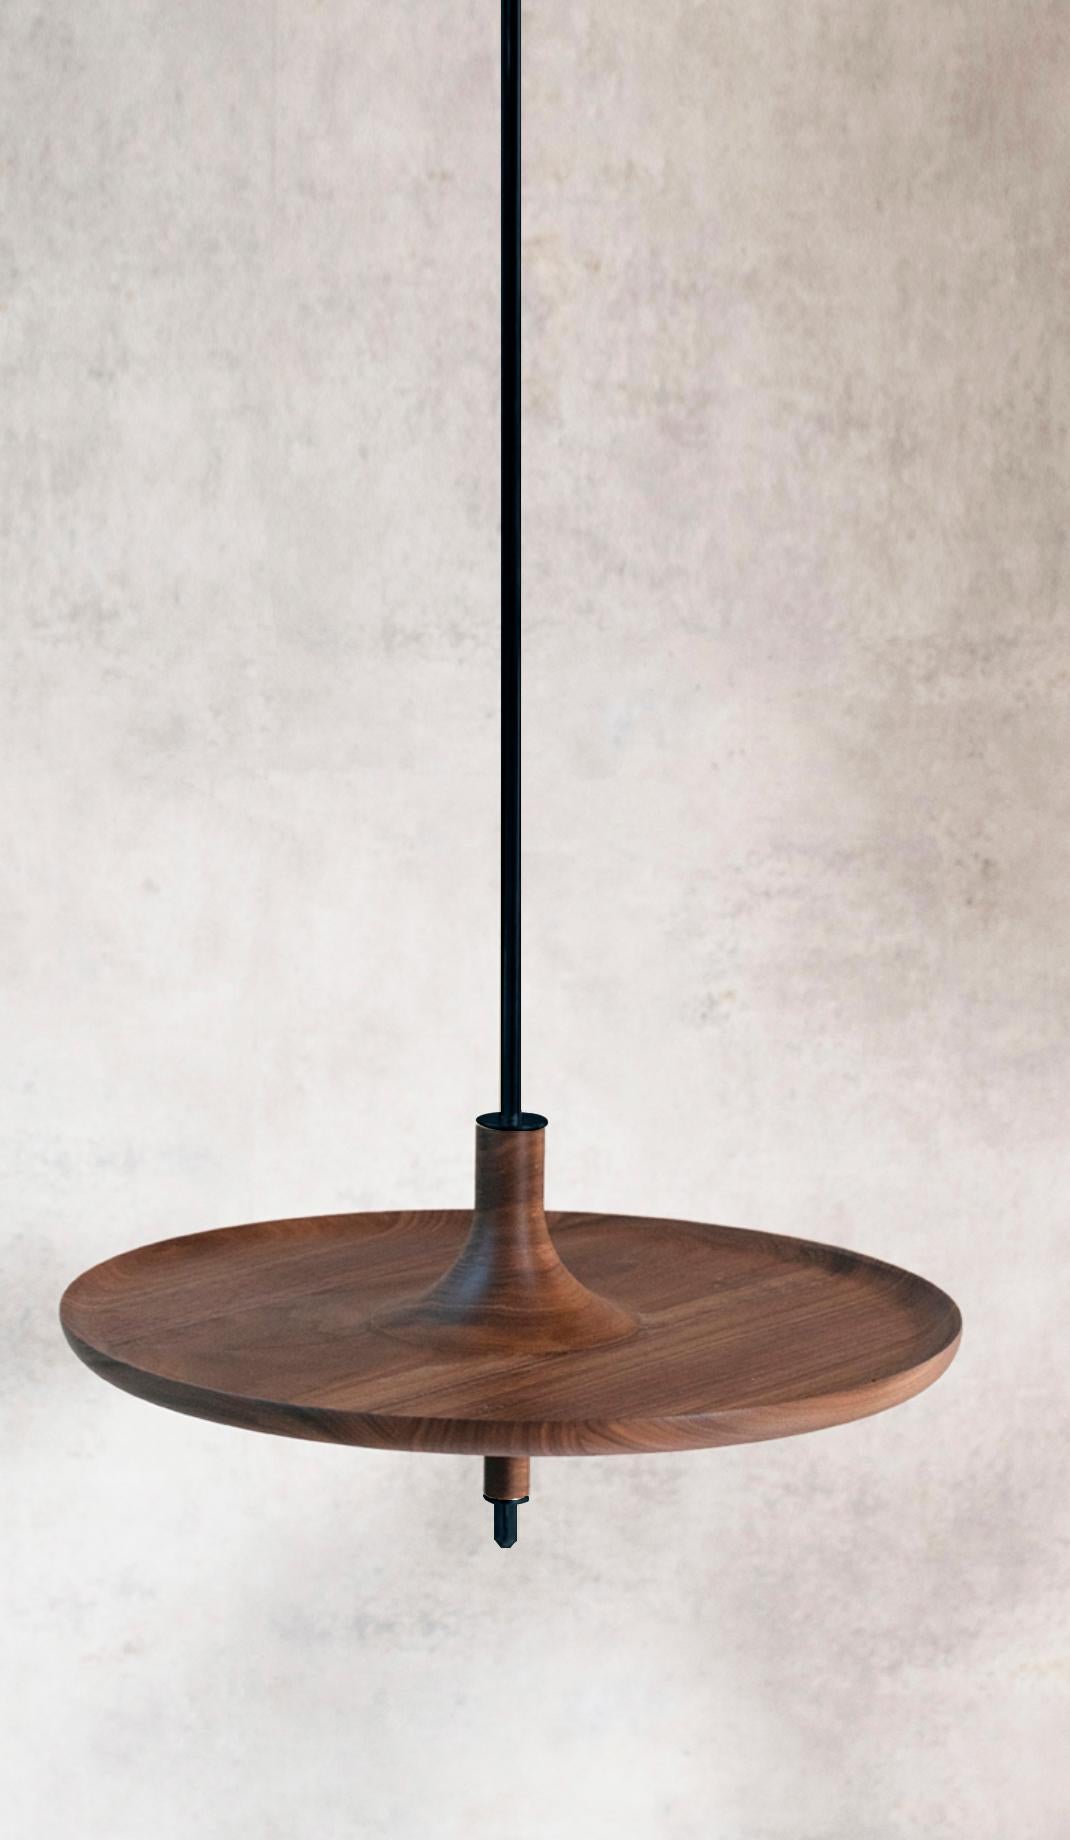 Toupy Walnut And Black Metal 38 Hanging Table by Mademoiselle Jo
Dimensions: Ø 38 x H 150 cm.
Materials: Walnut wood and black metal.

Available in four colors, two bar versions and several diameters. Please contact us. 

Taking the shape of a